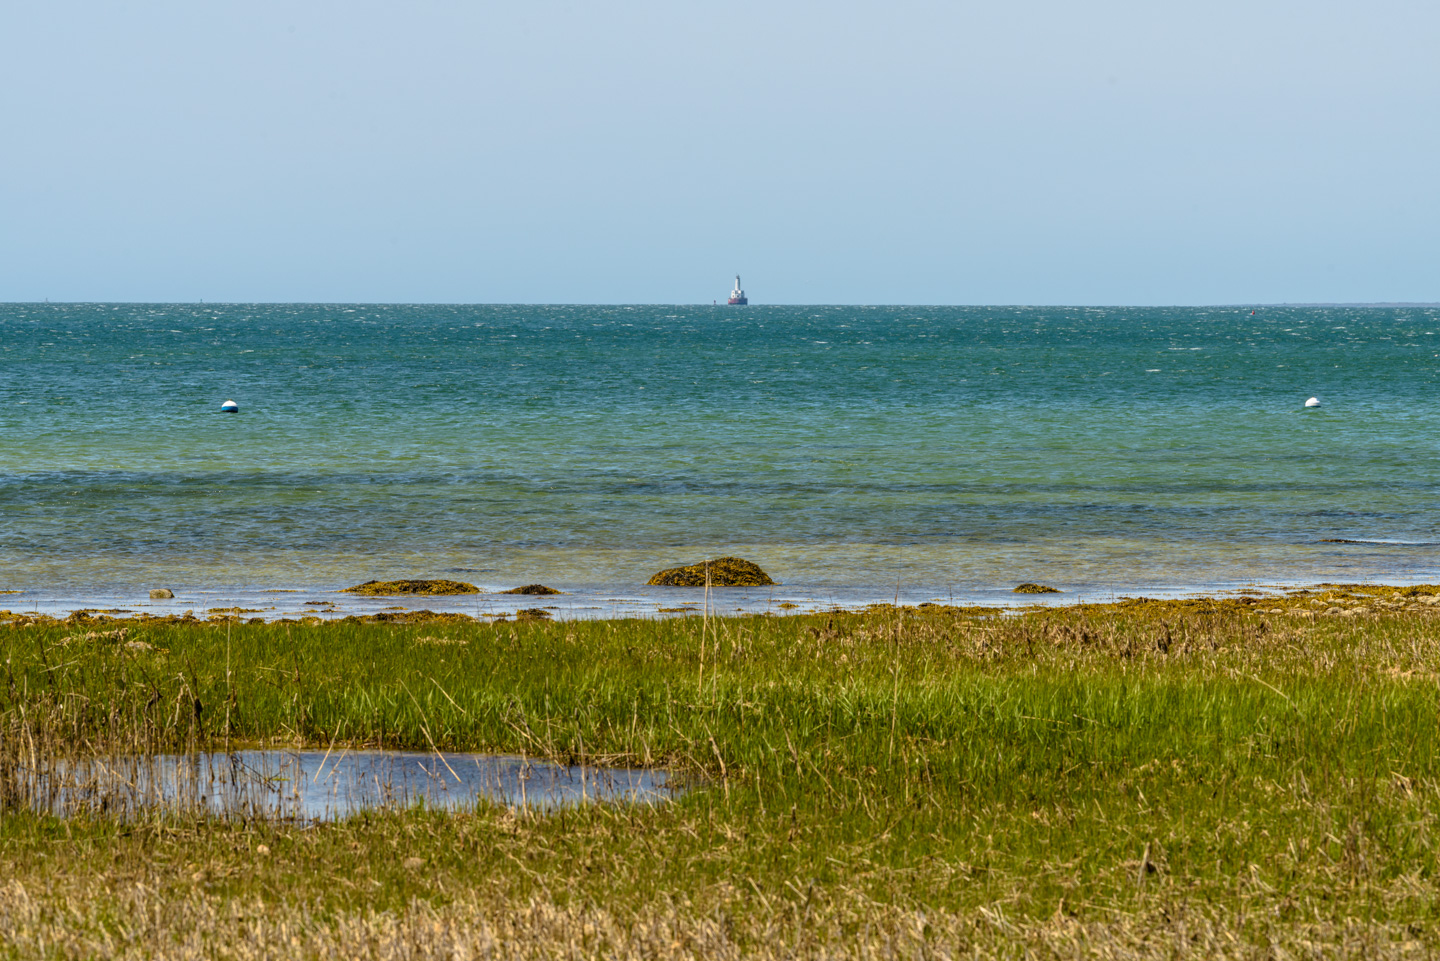 View out across the water with a lighthouse just showing in the distance